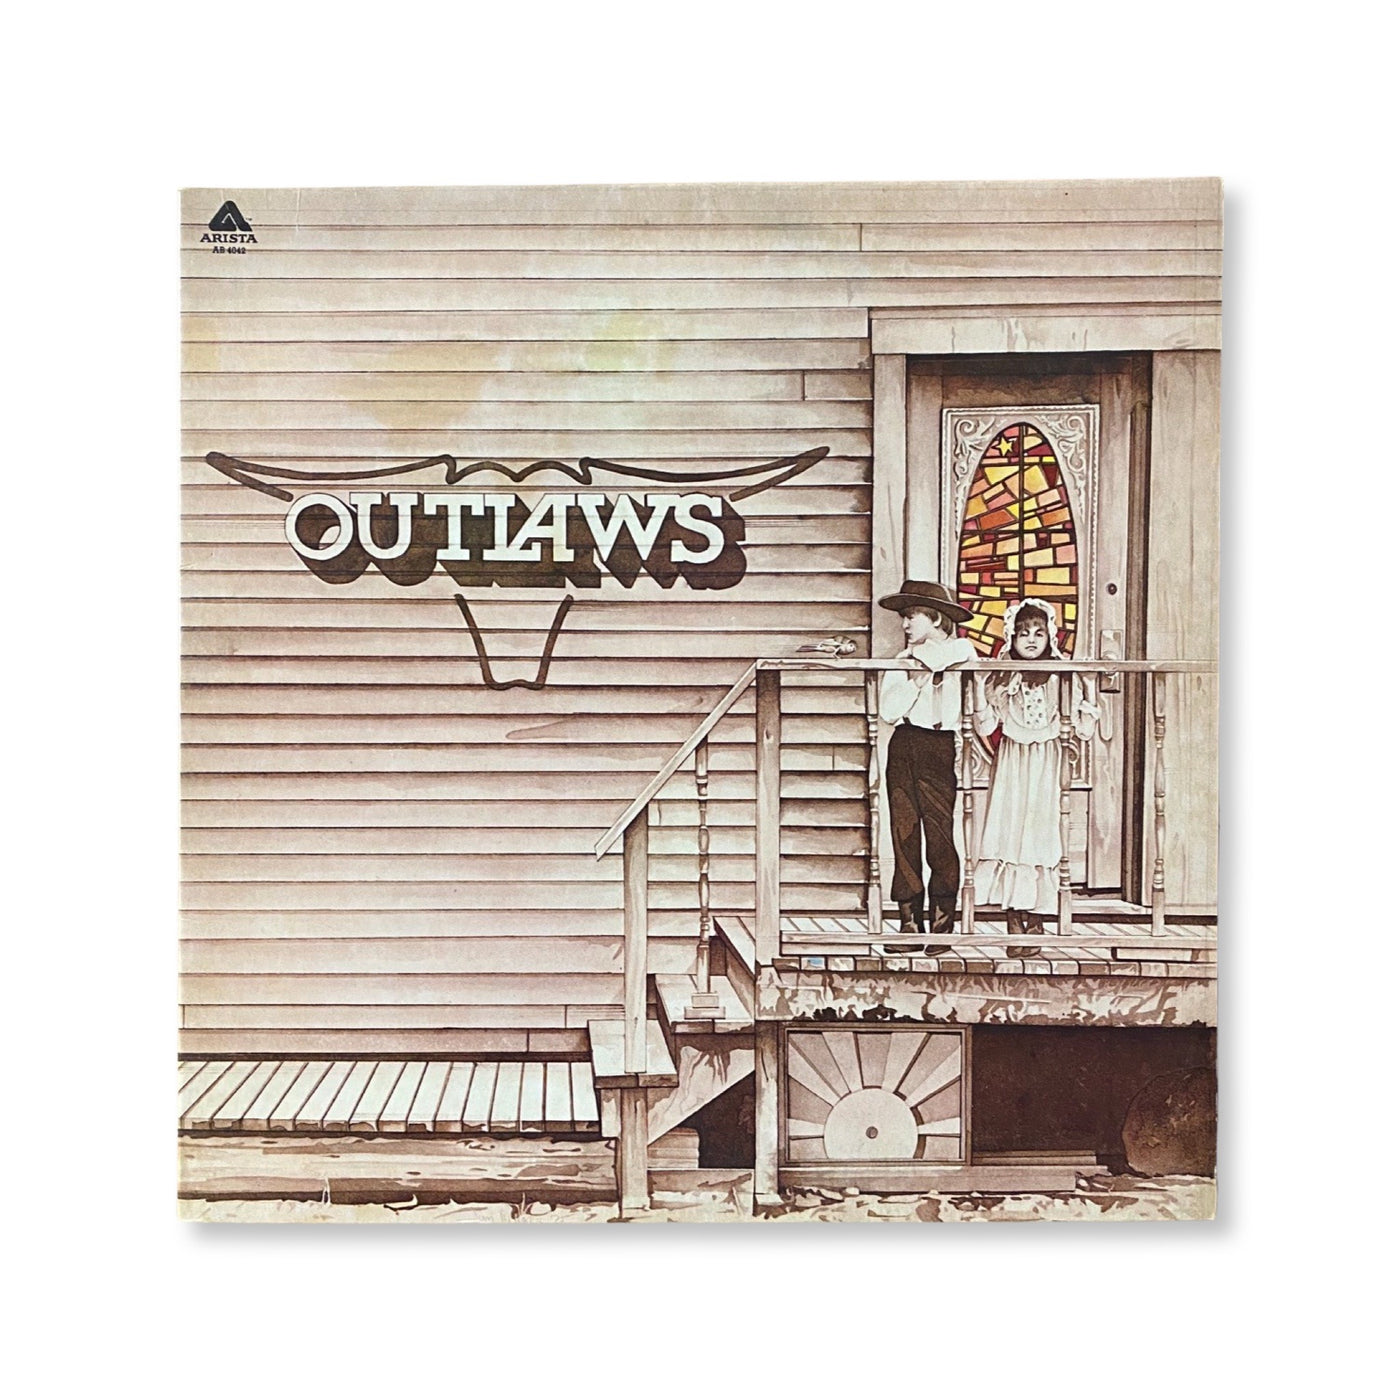 Outlaws - Outlaws